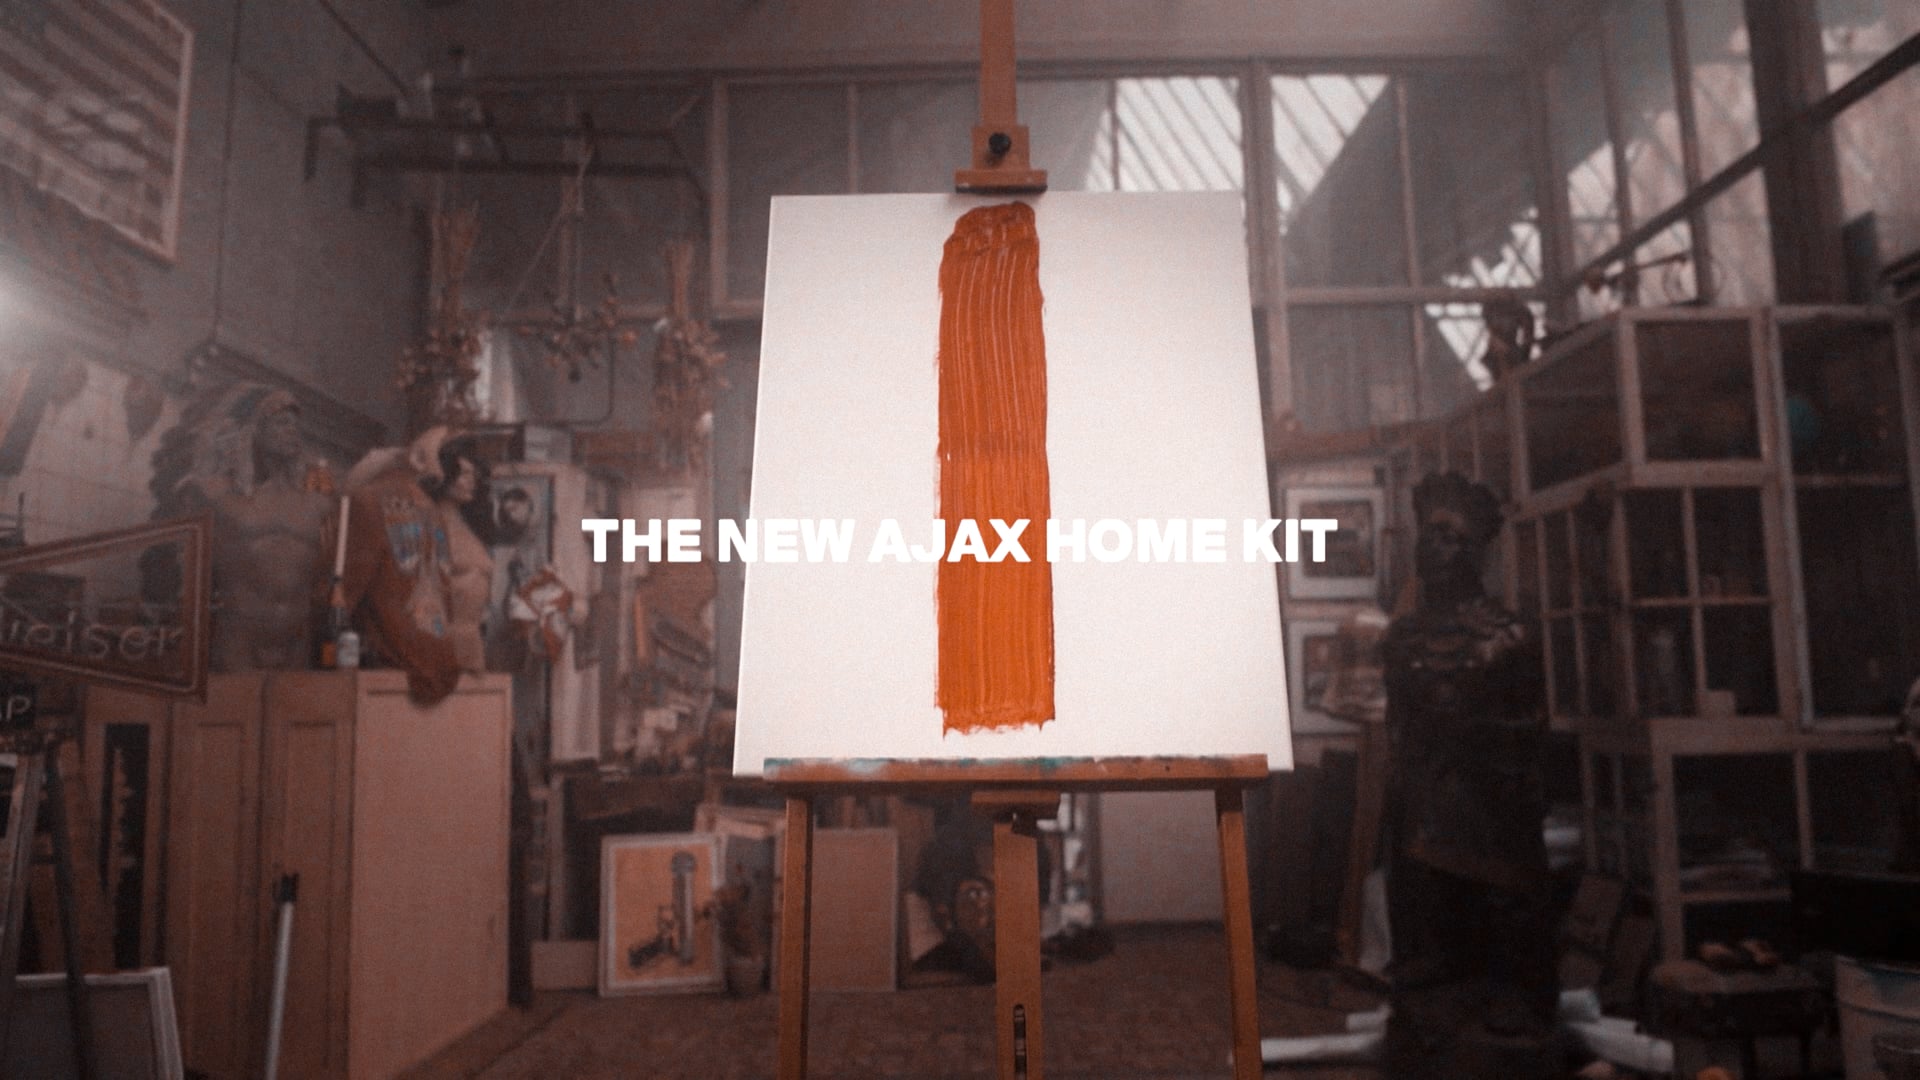 Ajax home jersey '20/'21 - Promotion video